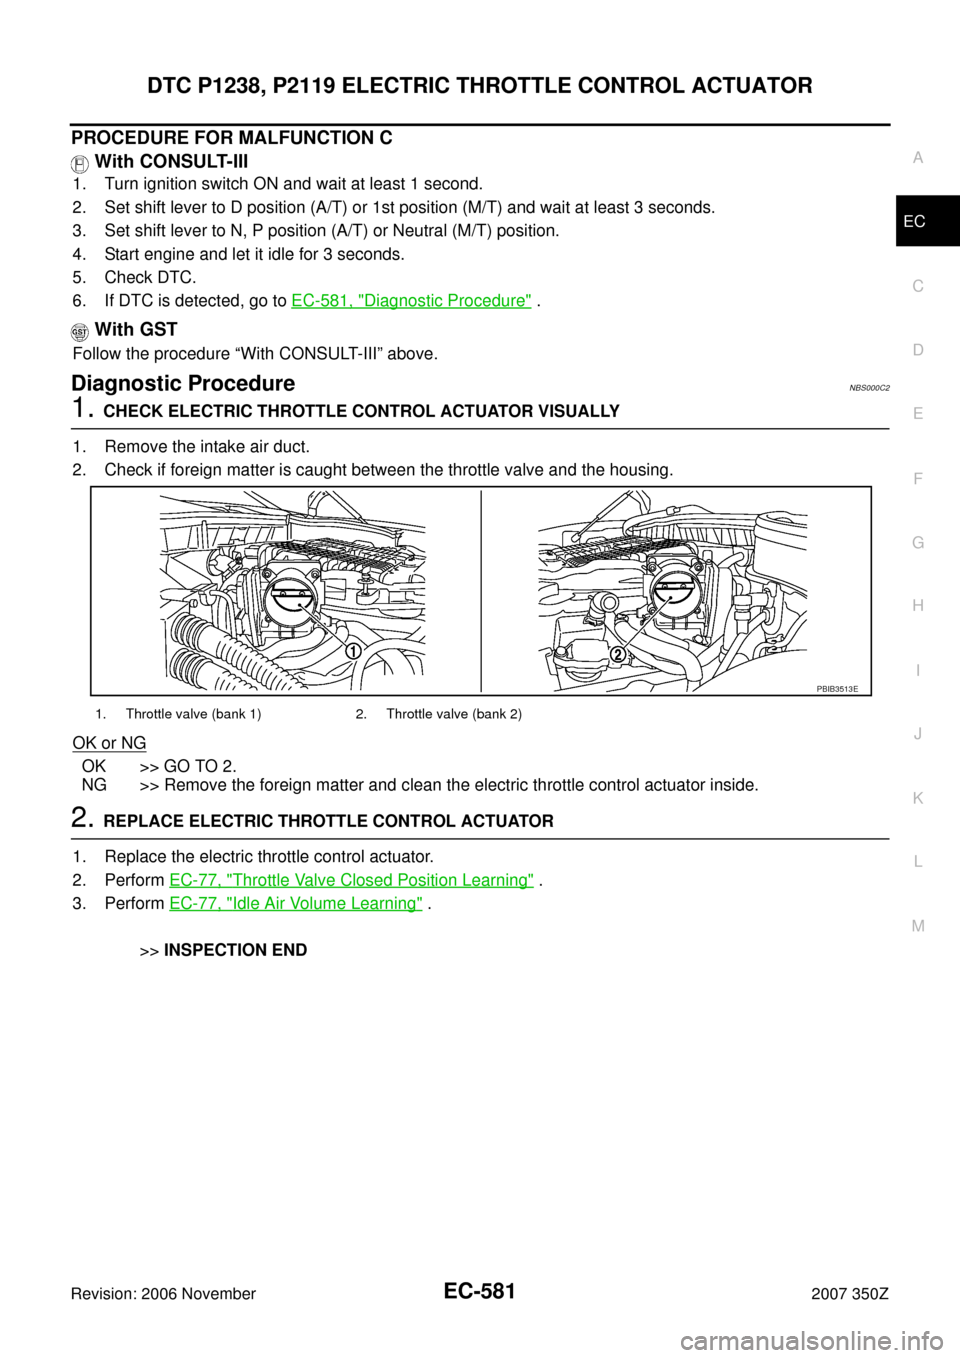 NISSAN 350Z 2007 Z33 Engine Control Workshop Manual DTC P1238, P2119 ELECTRIC THROTTLE CONTROL ACTUATOR
EC-581
C
D
E
F
G
H
I
J
K
L
MA
EC
Revision: 2006 November2007 350Z
PROCEDURE FOR MALFUNCTION C
 With CONSULT-III
1. Turn ignition switch ON and wait 